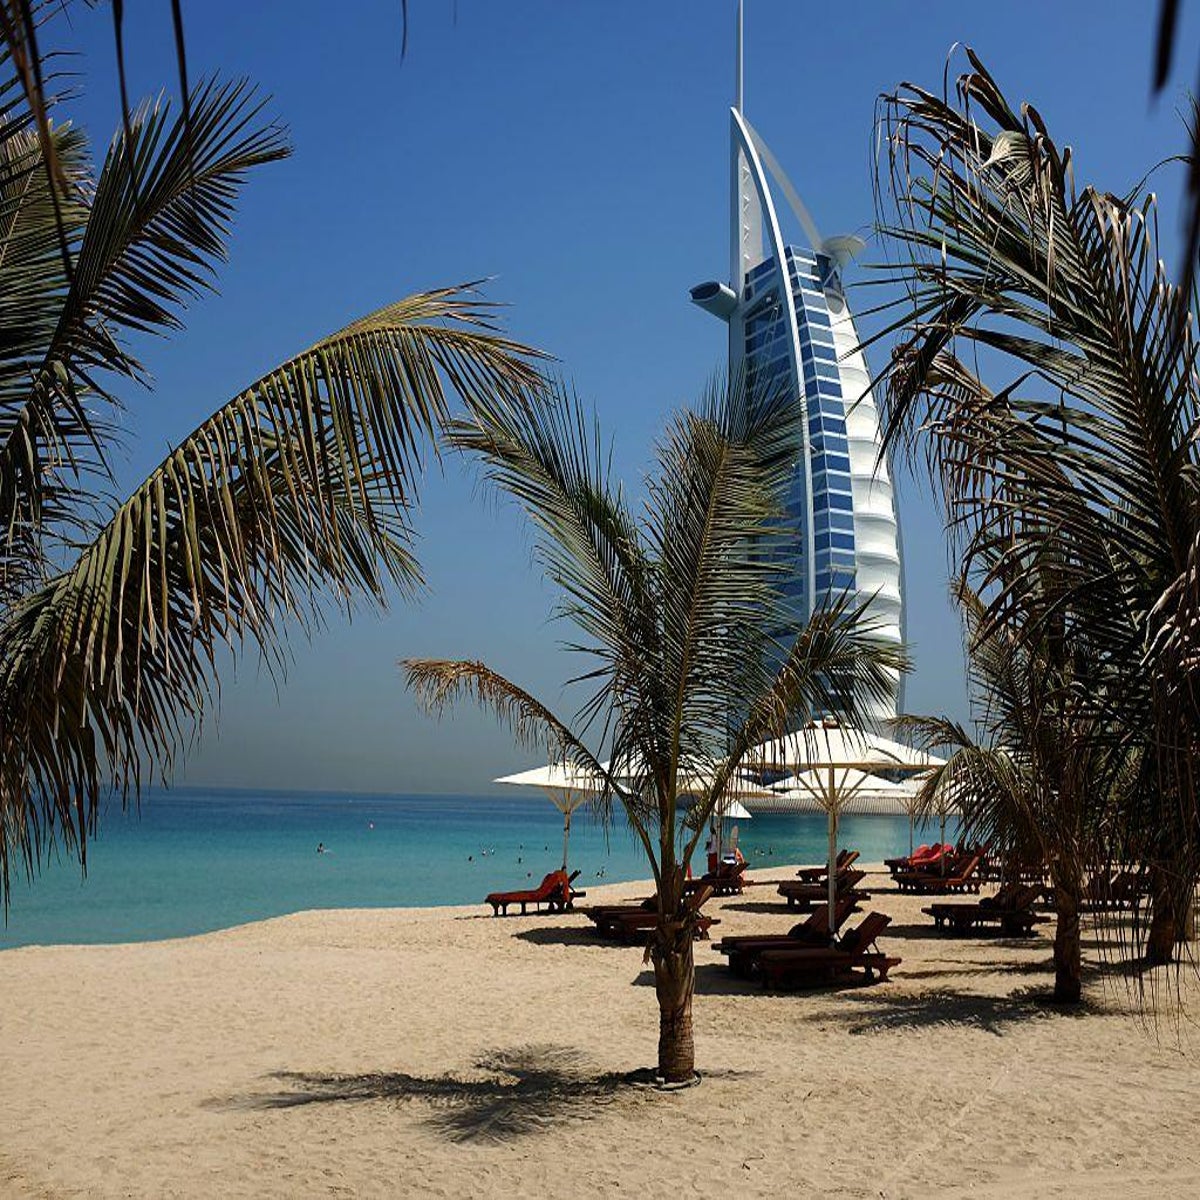 Topless Beach Art - What not to do in Dubai as a tourist | The Independent | The Independent